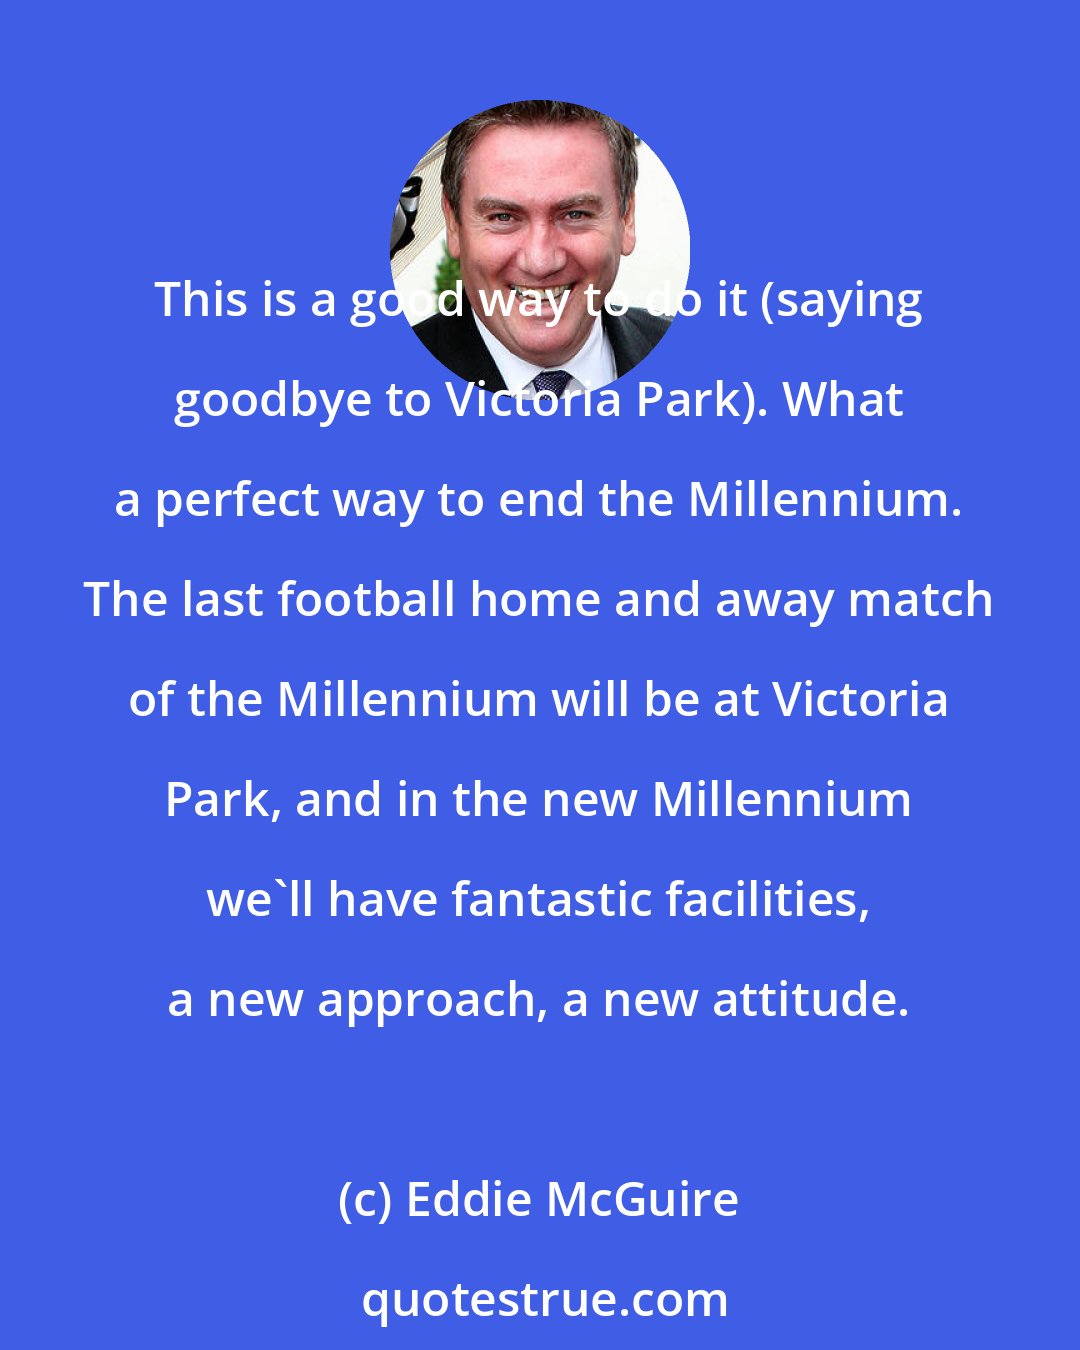 Eddie McGuire: This is a good way to do it (saying goodbye to Victoria Park). What a perfect way to end the Millennium. The last football home and away match of the Millennium will be at Victoria Park, and in the new Millennium we'll have fantastic facilities, a new approach, a new attitude.